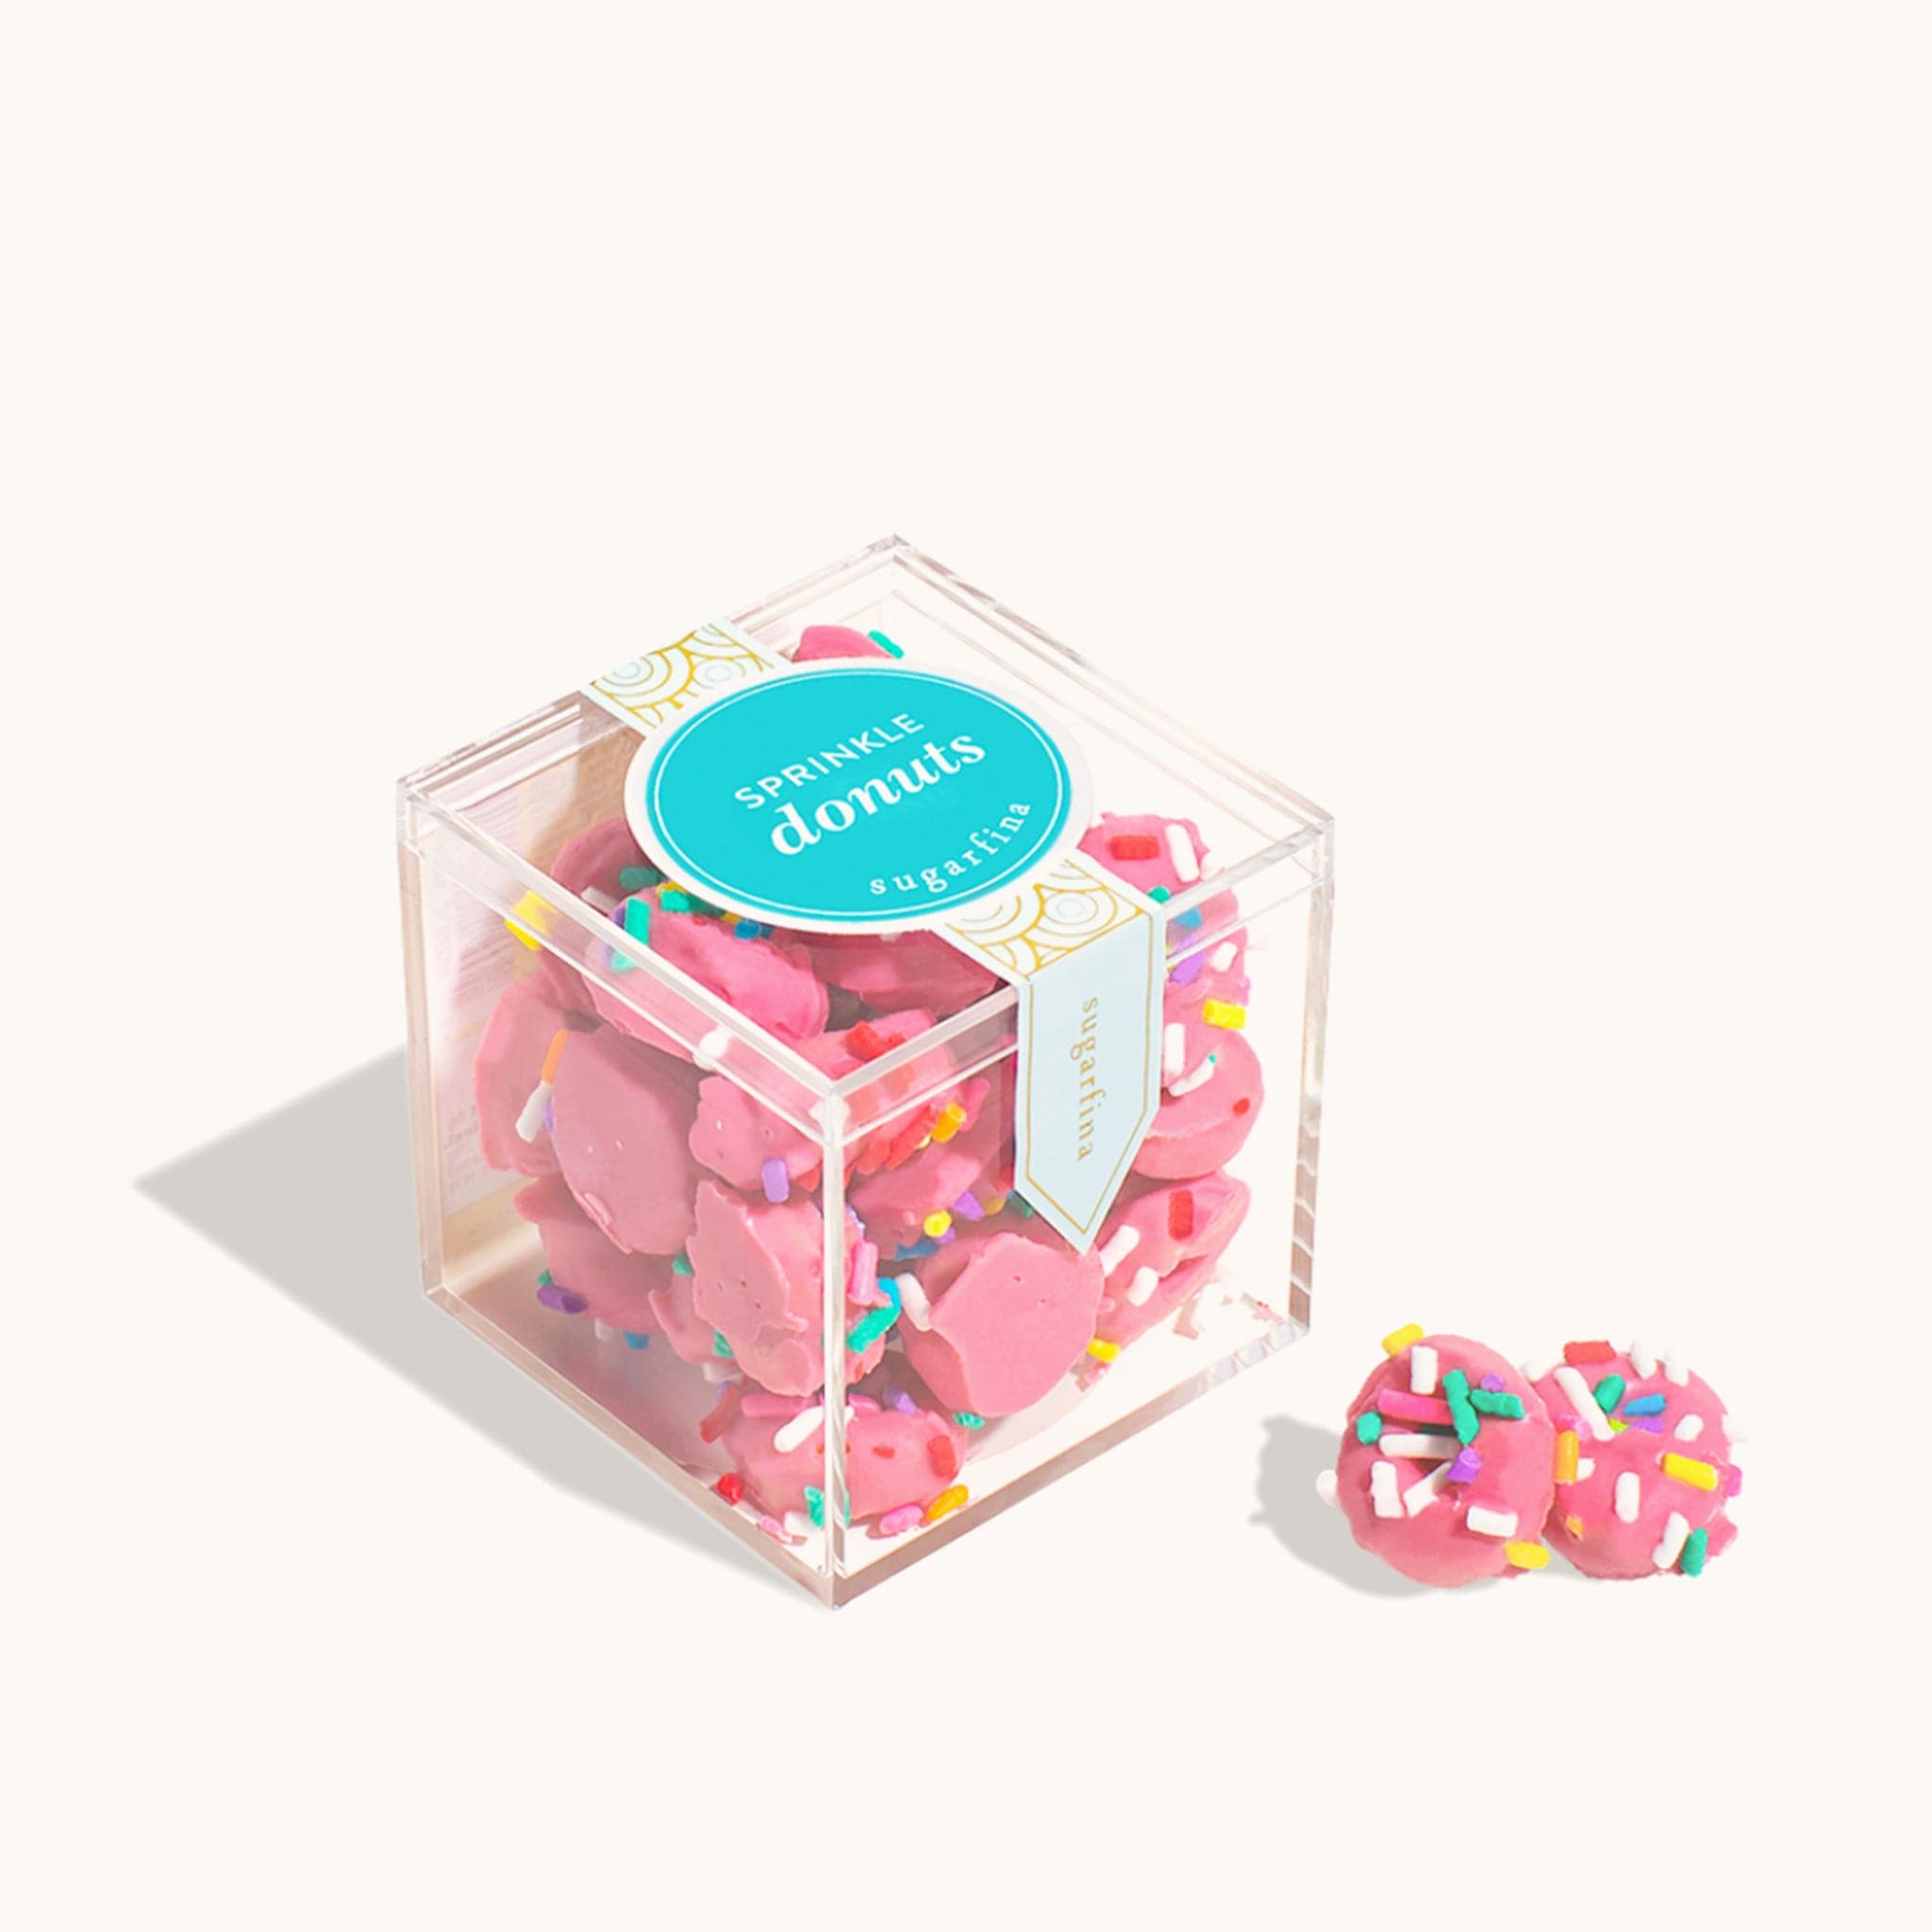 Plastic cube of miniature pink donut candies topped with colorful sprinkles. The box reads 'Sprinkle donuts' across a teal circular logo. Two donut candies are placed in front of the box. 